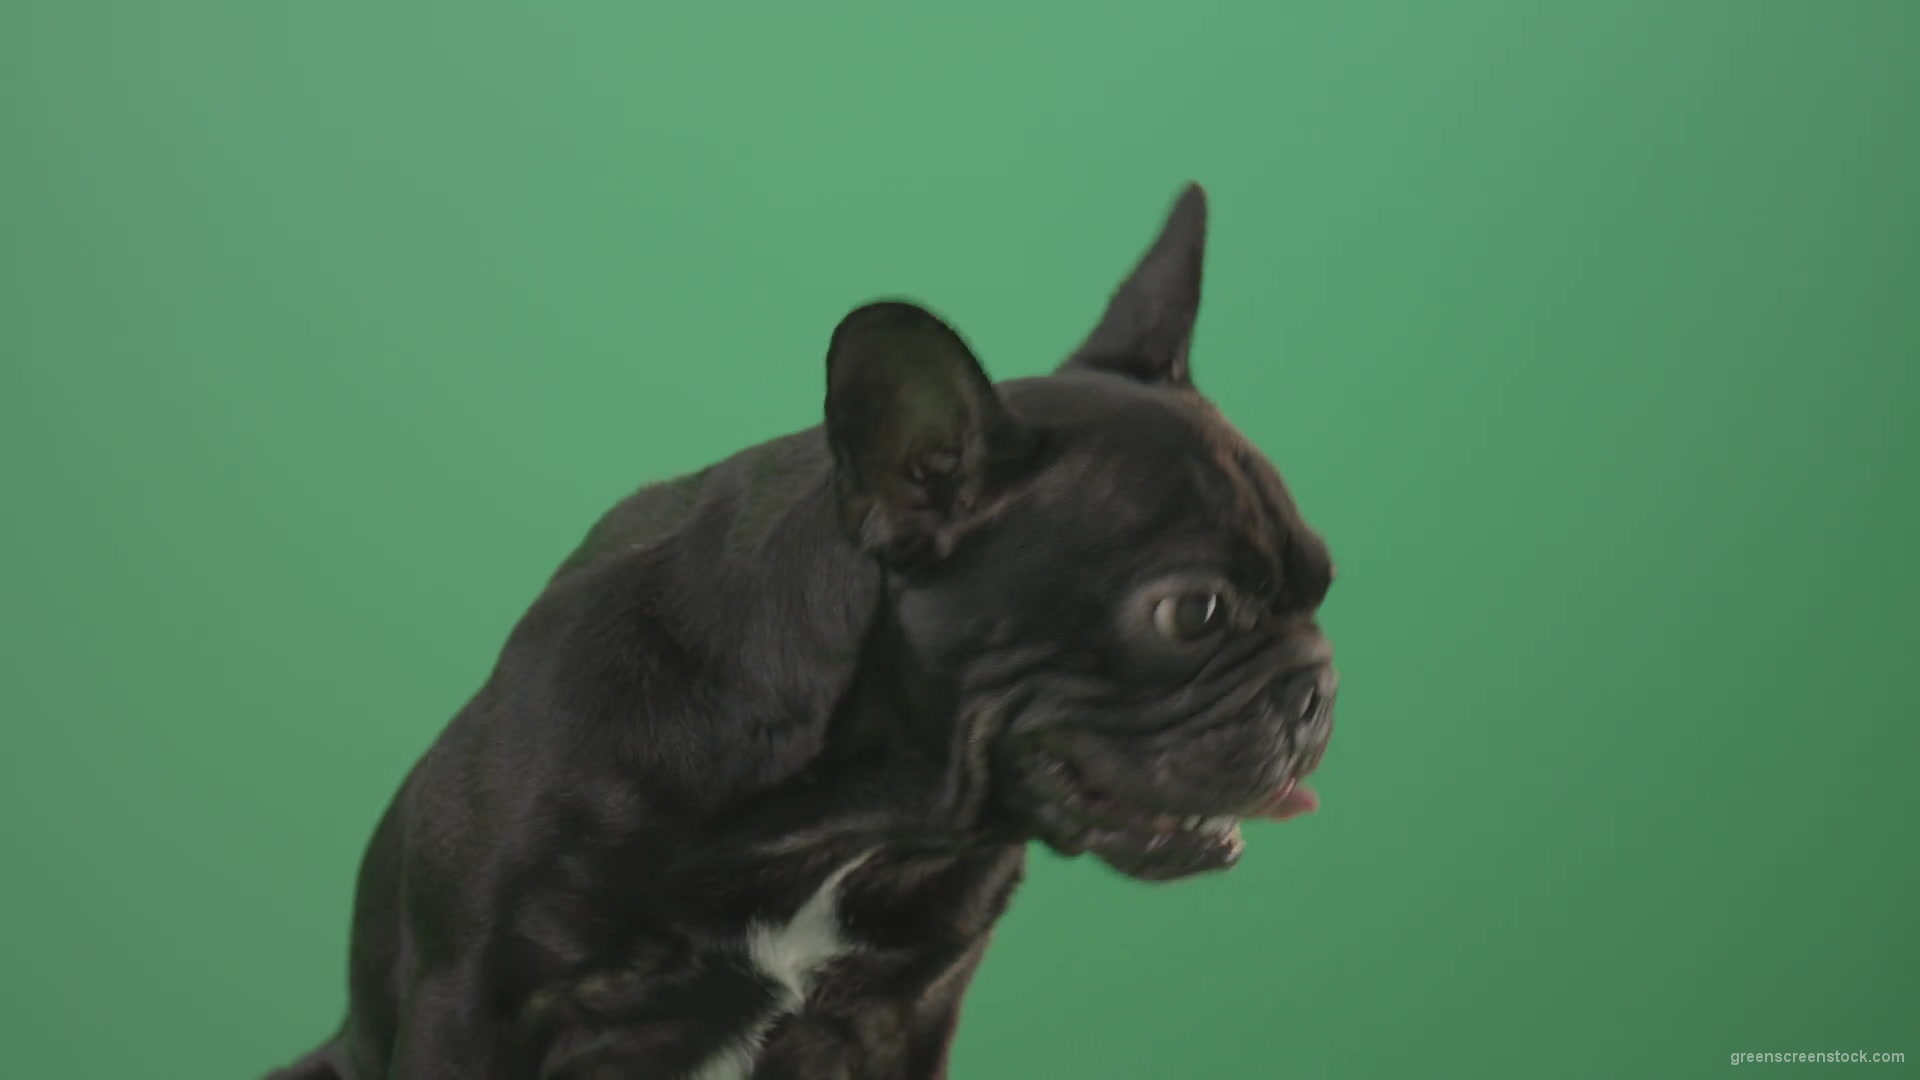 Face-portrait-of-scared-french-bulldog-toy-dog-isolated-on-green-screen-1920_004 Green Screen Stock